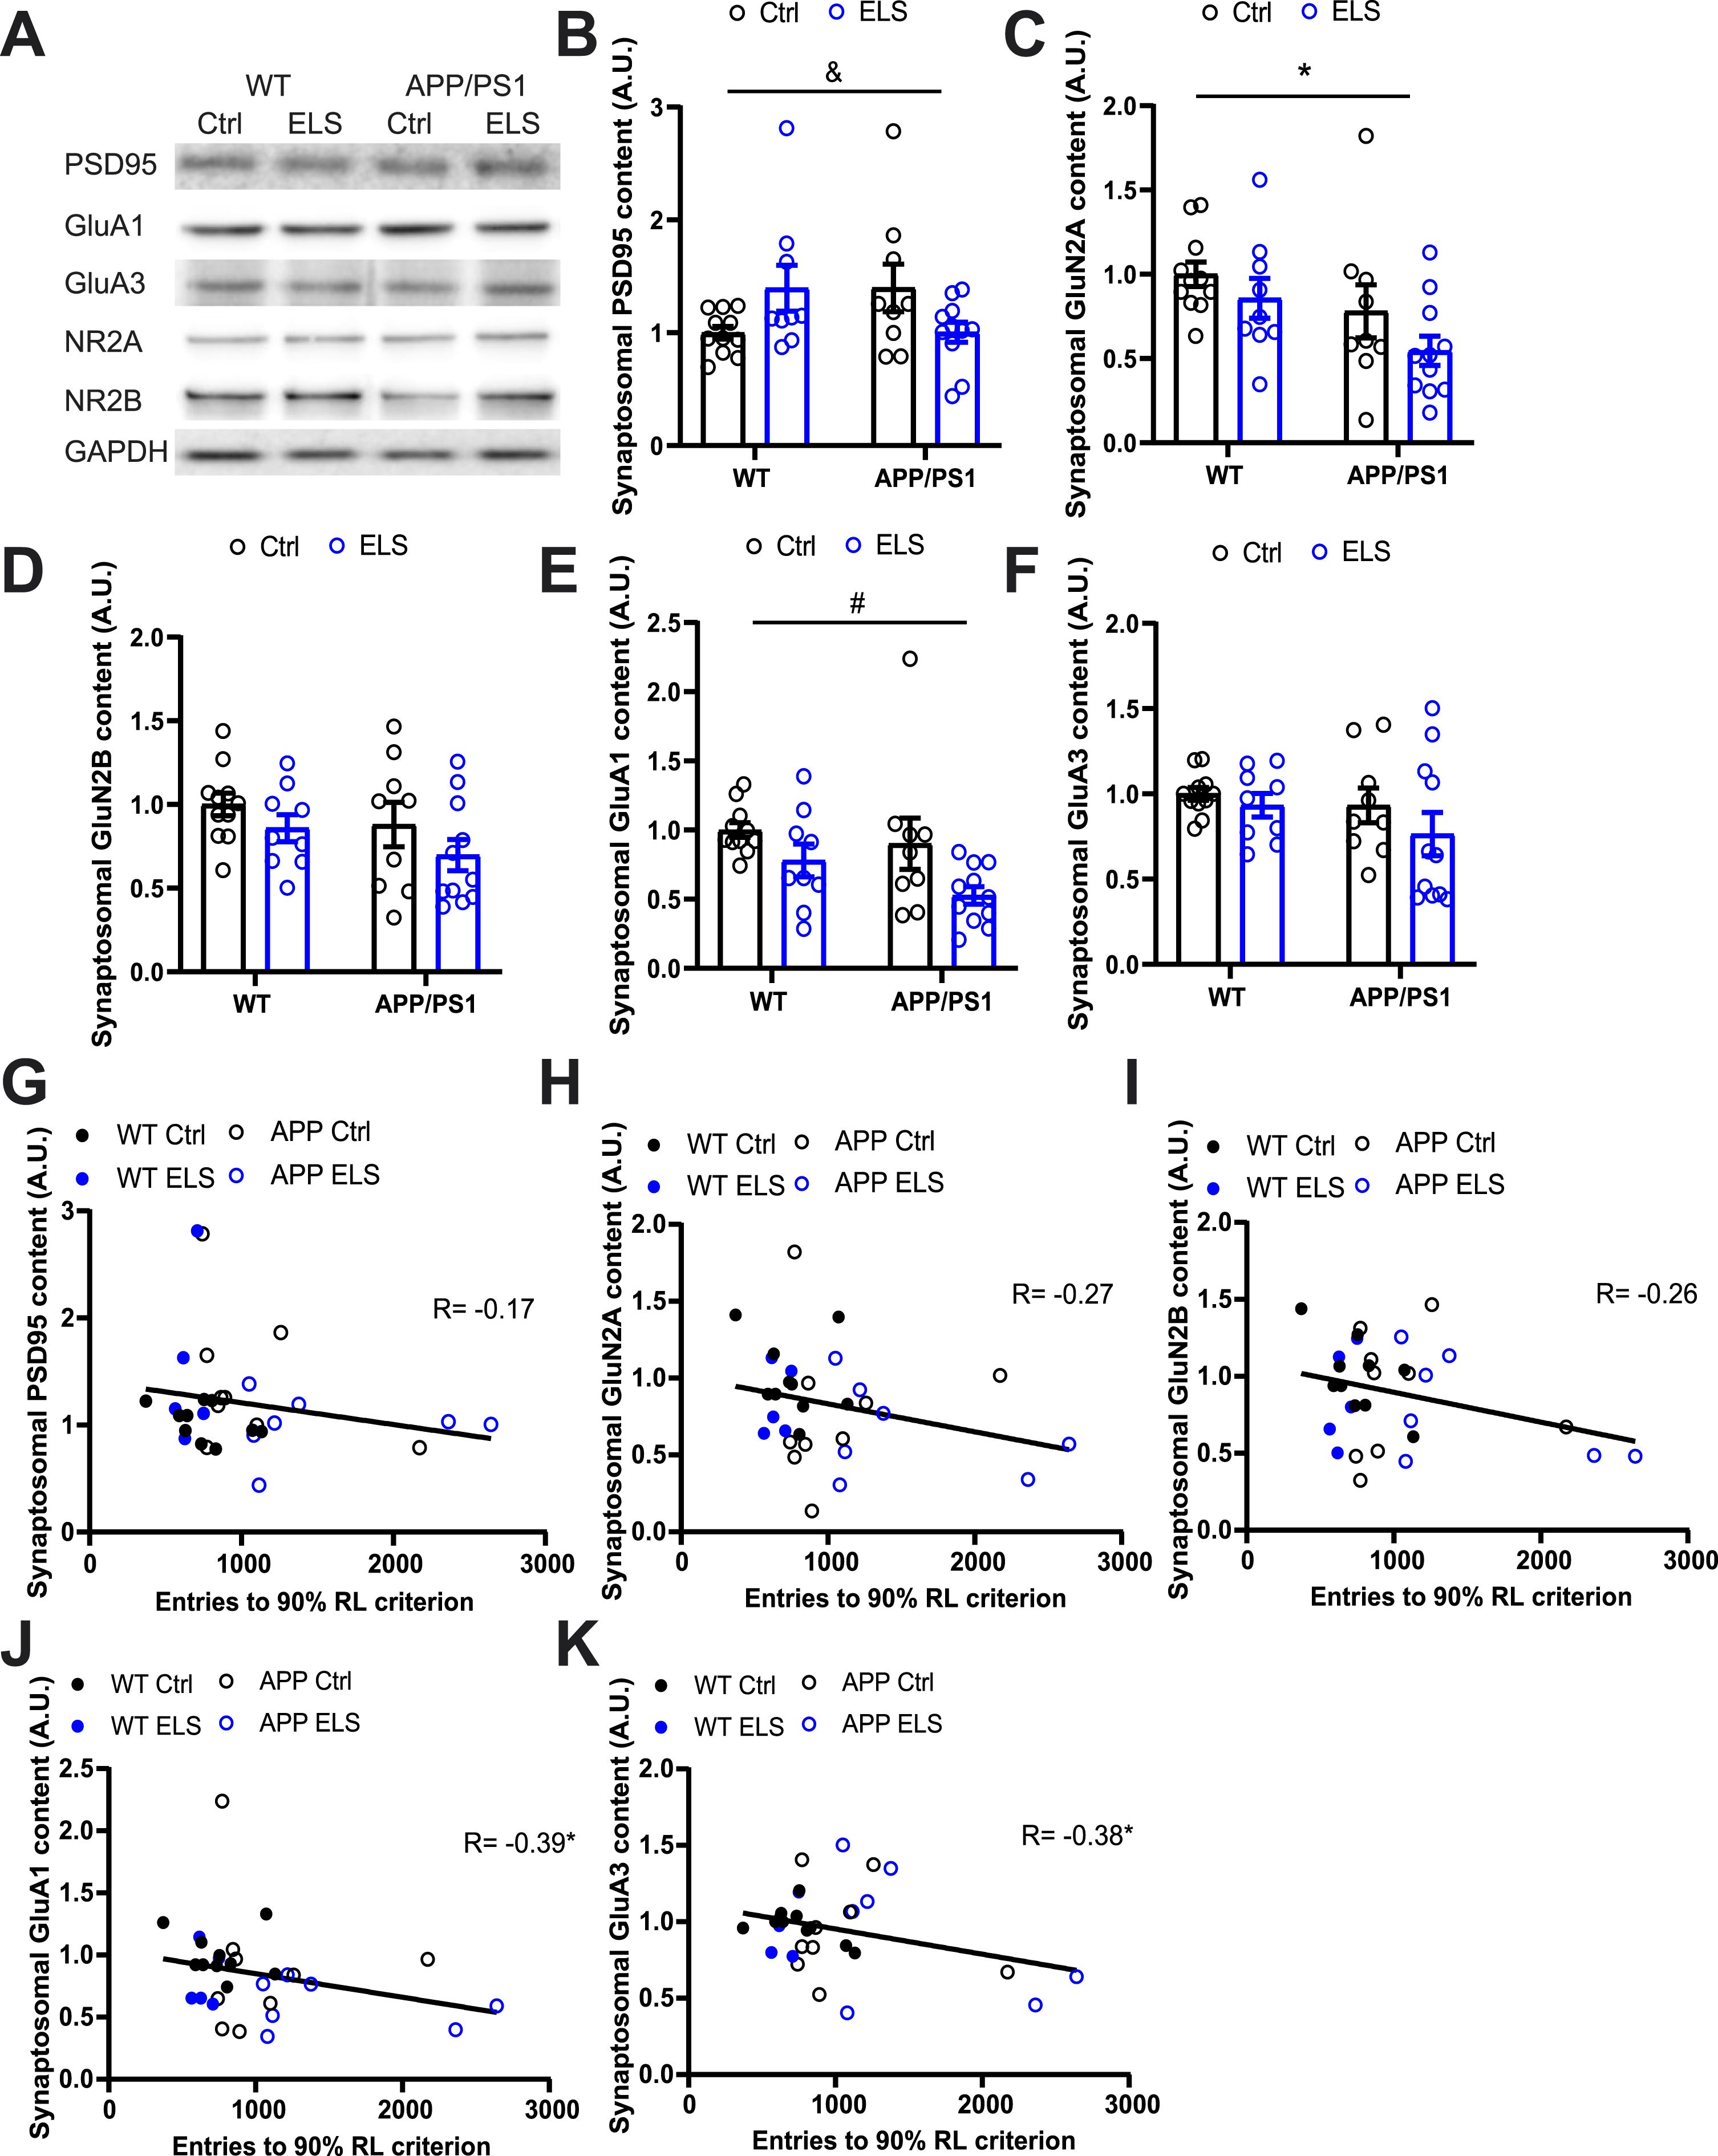 ELS and genotype affects synaptosomal protein content in 3-month-old mice and synaptosomal GluA1 and GluA3 content negatively correlate with RL performance. A) Representative bands from western blots on hippocampal synaptosomal fractions. B) ELS differentially affects synaptosomal PSD95 content depending on the genotype (Fgenotype x condition(1,36) = 7.47, p = 0.01), post-hoc analysis did not reveal any differences between the groups. C) APP/PS1 mice have a significantly lower synaptosomal GluN2A content compared to WT mice (Fgenotype(1,36) = 5.99, p = 0.02). D) No differences were observed in the synaptosomal GluN2B content between the experimental groups. E) Mice that were exposed to ELS have a significantly lower synaptosomal GluA1 content compared to Ctrl mice (Fcondition(1,36) = 6.96, p = 0.02). F) No differences were observed in the synaptosomal GluA3 content between the experimental groups. Ctrl WT n = 11, ELS WT n = 9, Ctrl APP/PS1 n = 9, ELS APP/PS1 n = 11. The number of entries required to reach a 90% RL criterion did not correlate with the synaptosomal content of PSD95 (G), GluN2A (H) and GluN2B (I), regardless of experimental group. J) Synaptosomal GluA1 content negatively correlated with the number of entries required to reach a 90% criterion (r(29) = –0.39, p = 0.02), regardless of experimental group. K) Synaptosomal GluA3 content negatively correlated with the number of entries required to reach a 90% criterion (r(29) = –0.38, p = 0.03). Data is presented as mean±SEM. &two-way ANOVA interaction effect of genotype and condition, p < 0.05. *two-way ANOVA main effect of genotype (C) and significant Pearson R correlation (J and K), p < 0.05. #two-way ANOVA main effect of condition, p < 0.05.